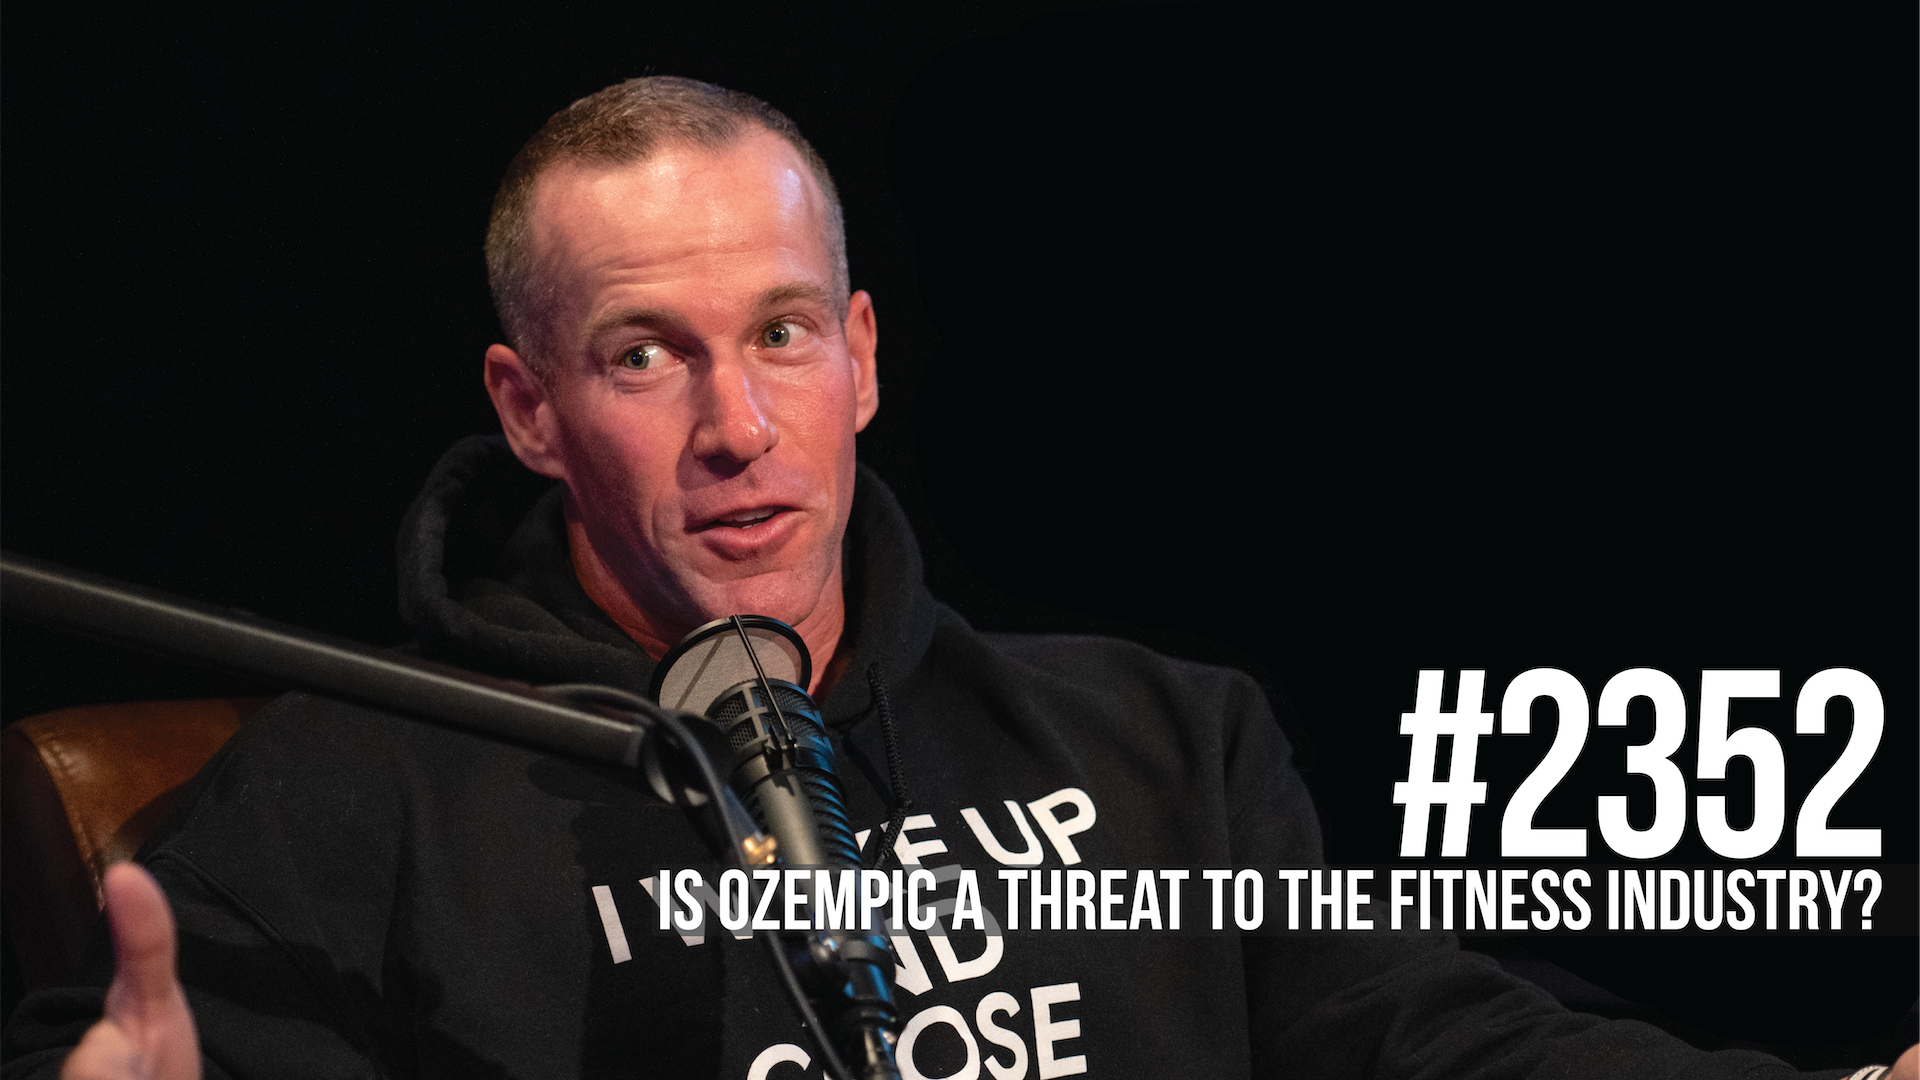 2352: Is Ozempic a Threat to the Fitness Industry?